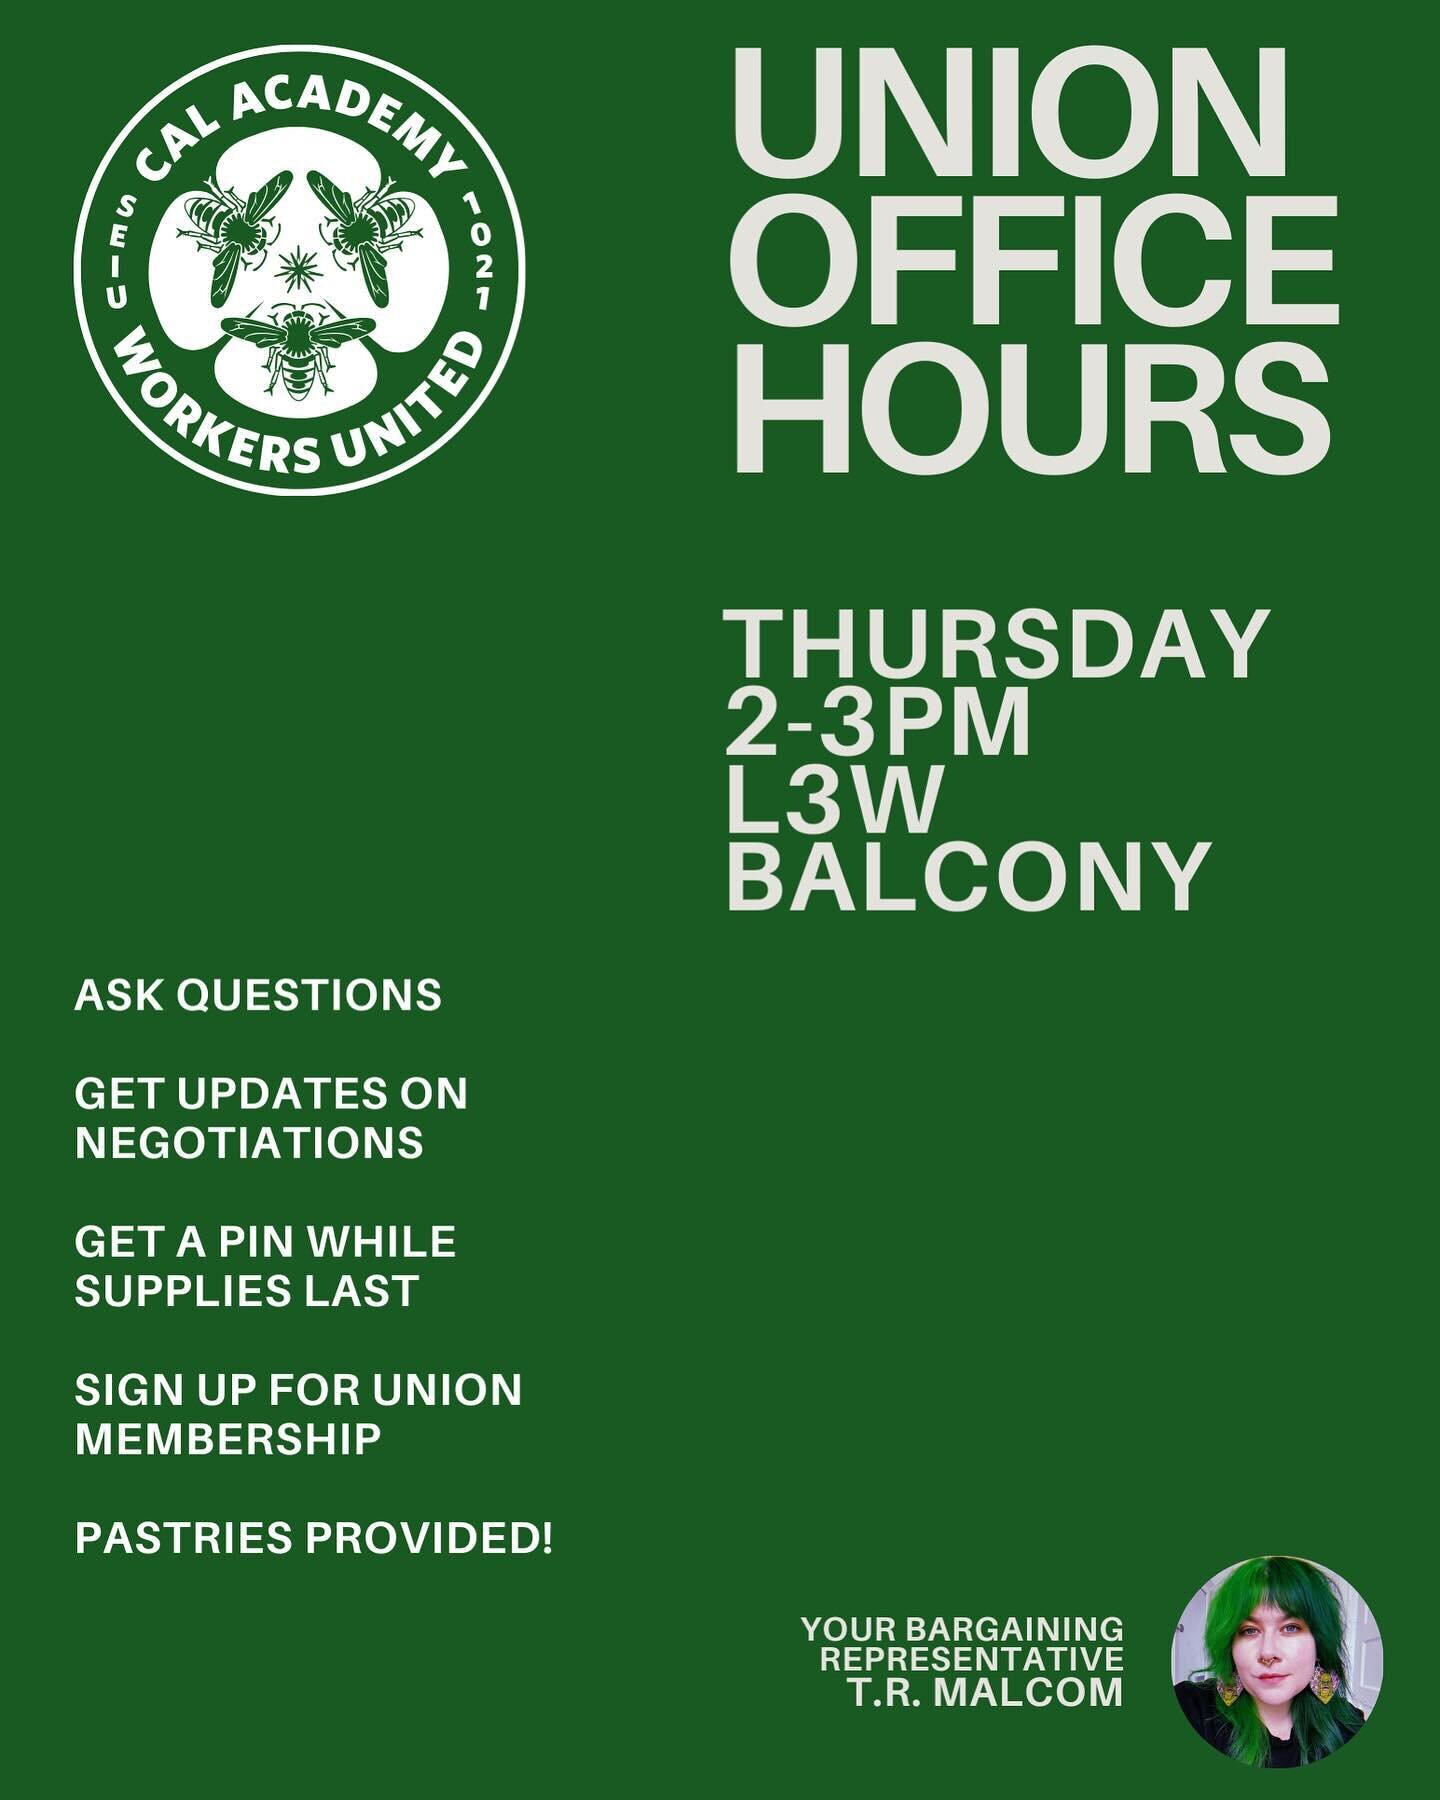 ATTN: Brand Marketing &amp; Sales workers! Your elected bargaining team representative, T.R. Malcom, is holding office hours this Thursday to answer questions and hear your ideas on what you want to see in our first contract. Come through, grab a pin